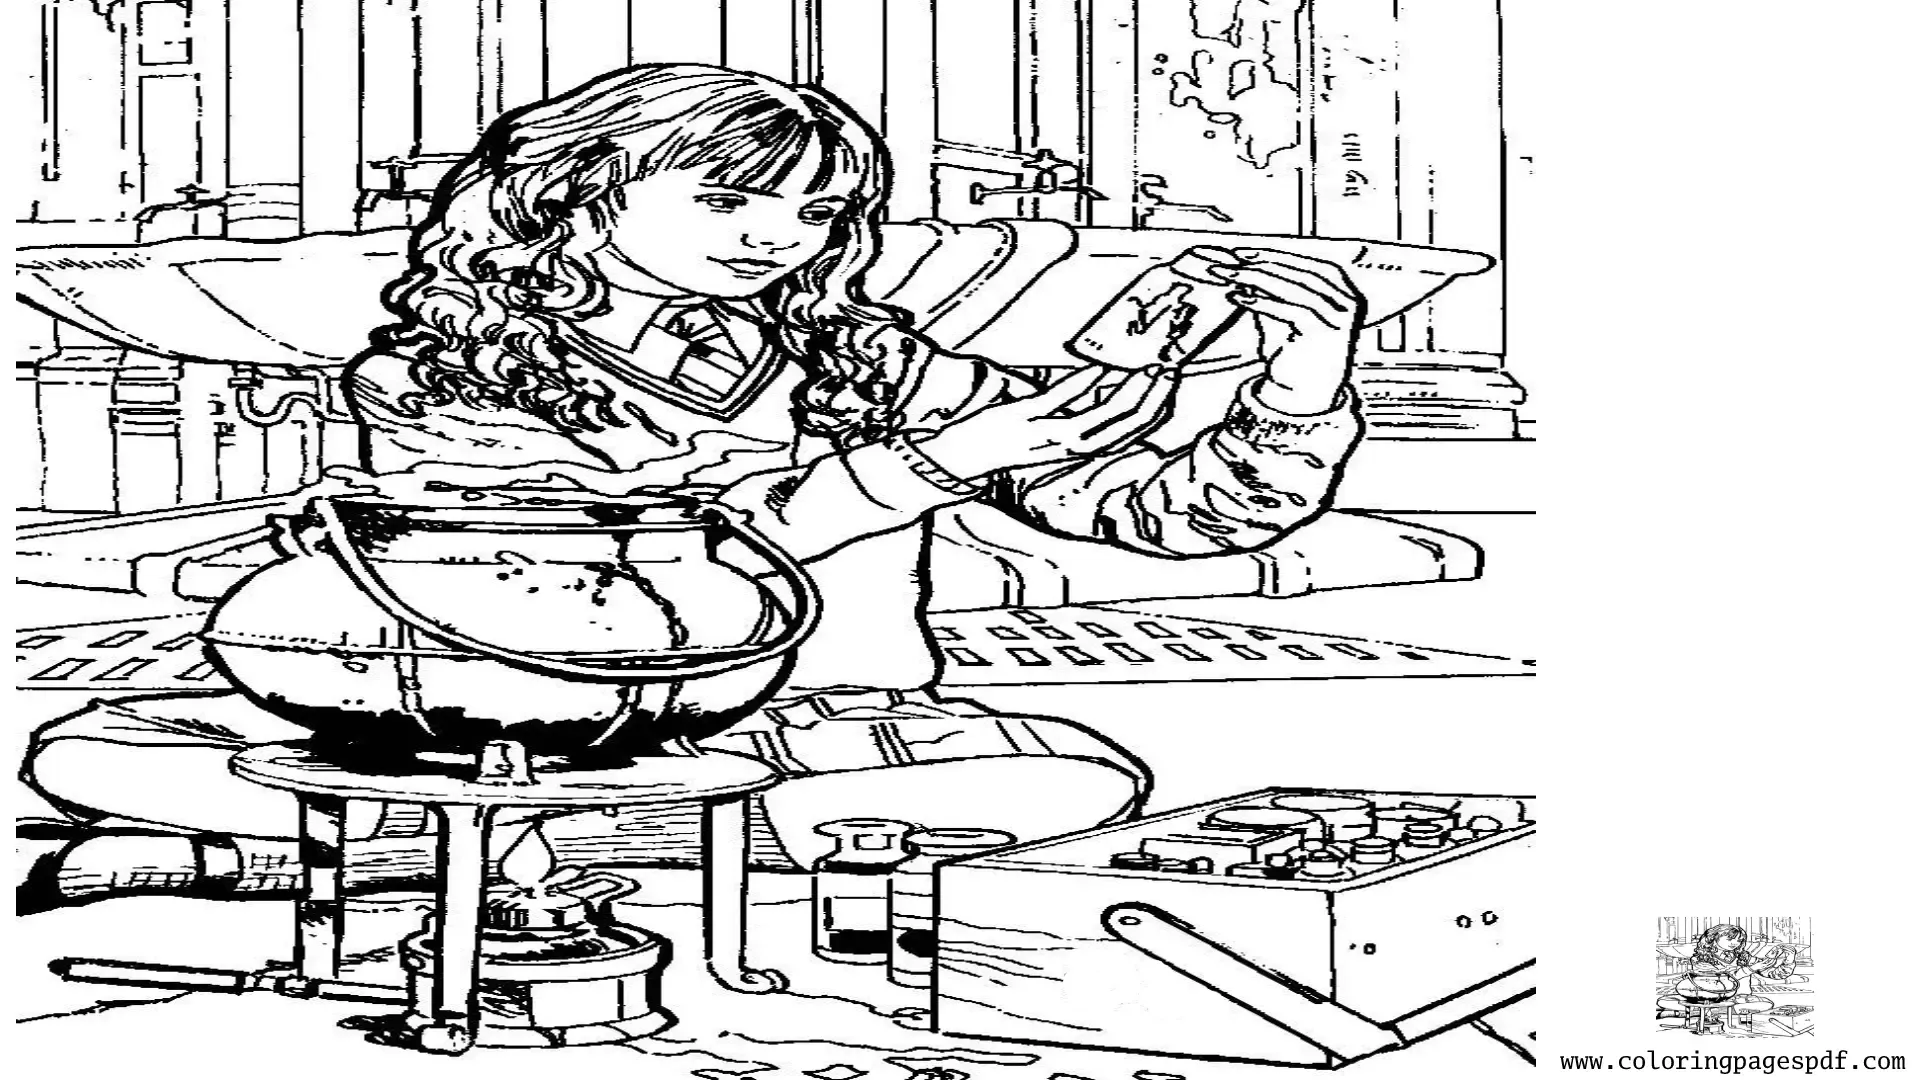 Coloring Pages Of Hermione Granger